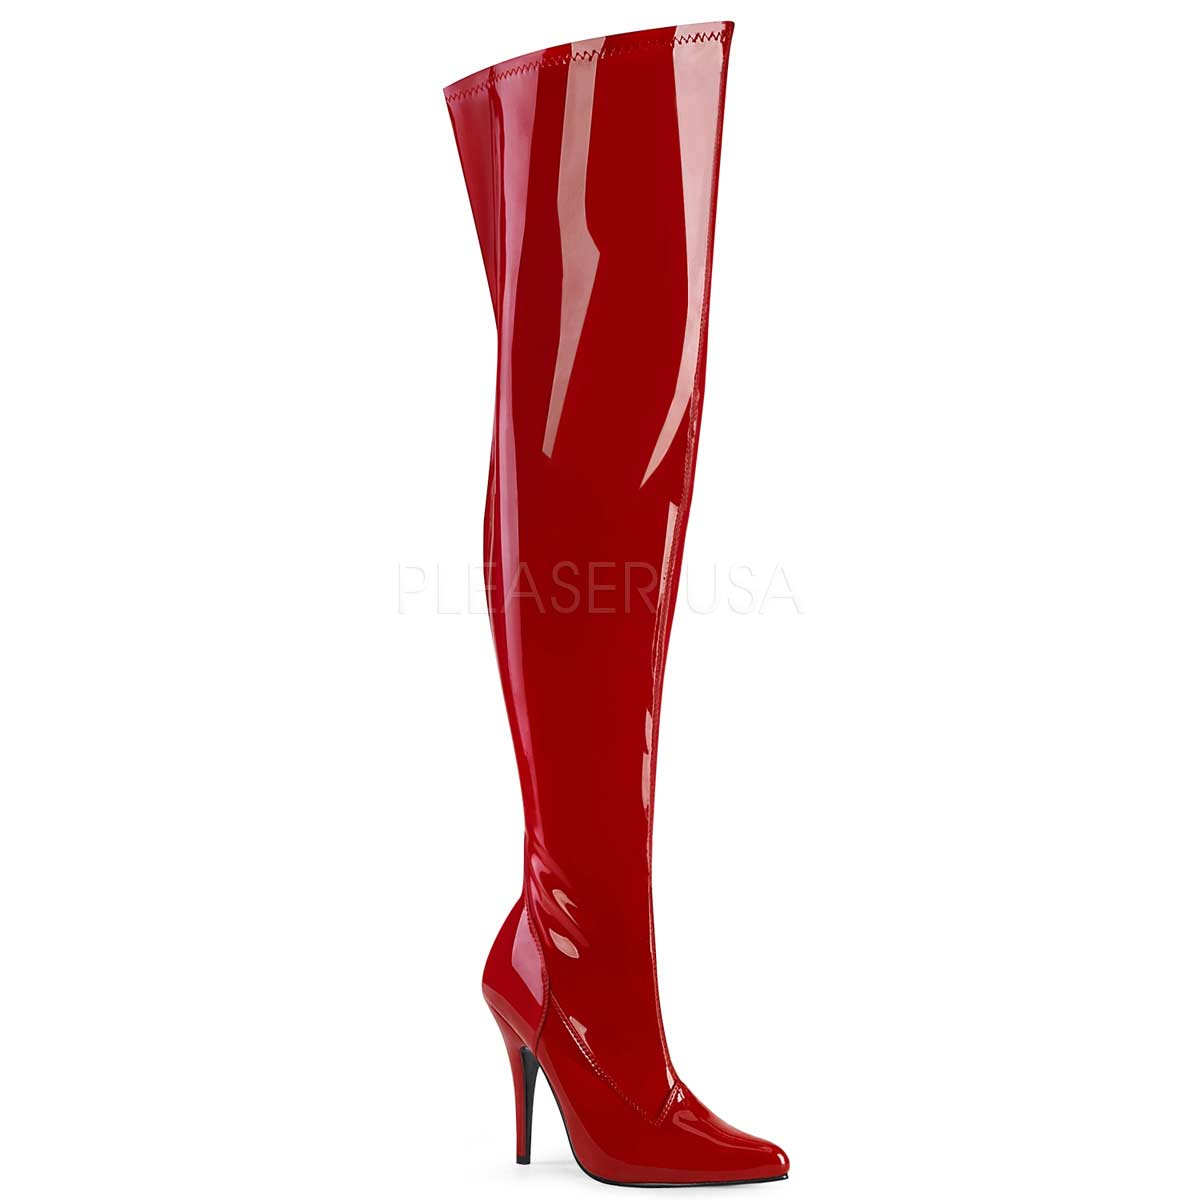 Pleaser Seduce-3000WC - Red Str Pat in Sexy Boots - $77.95